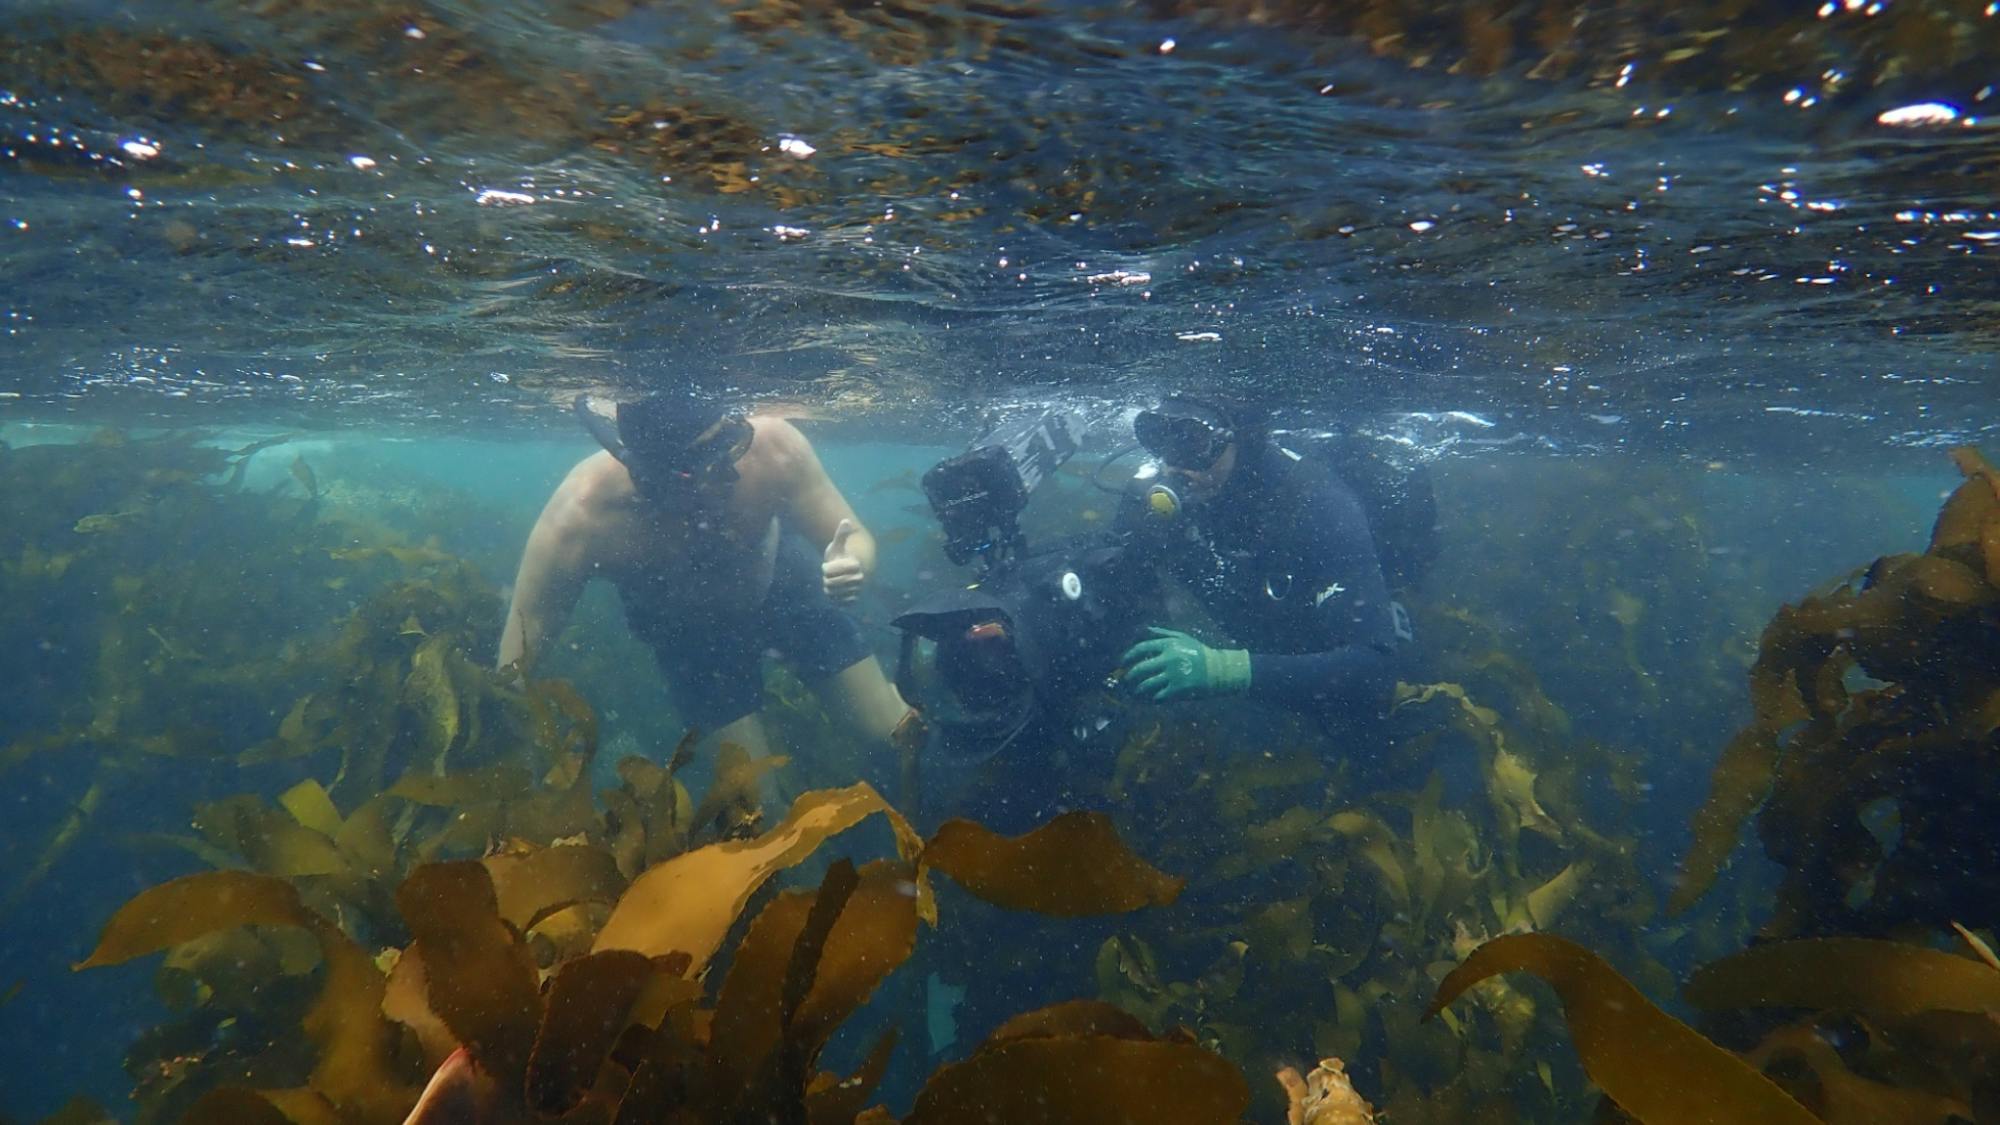 Foster and Roger Horrocks snorkel in the kelp forest. Horrocks is maneuvering a large camera. The water is suffused with light and the greenish yellow kelp seems to wave in the current. 